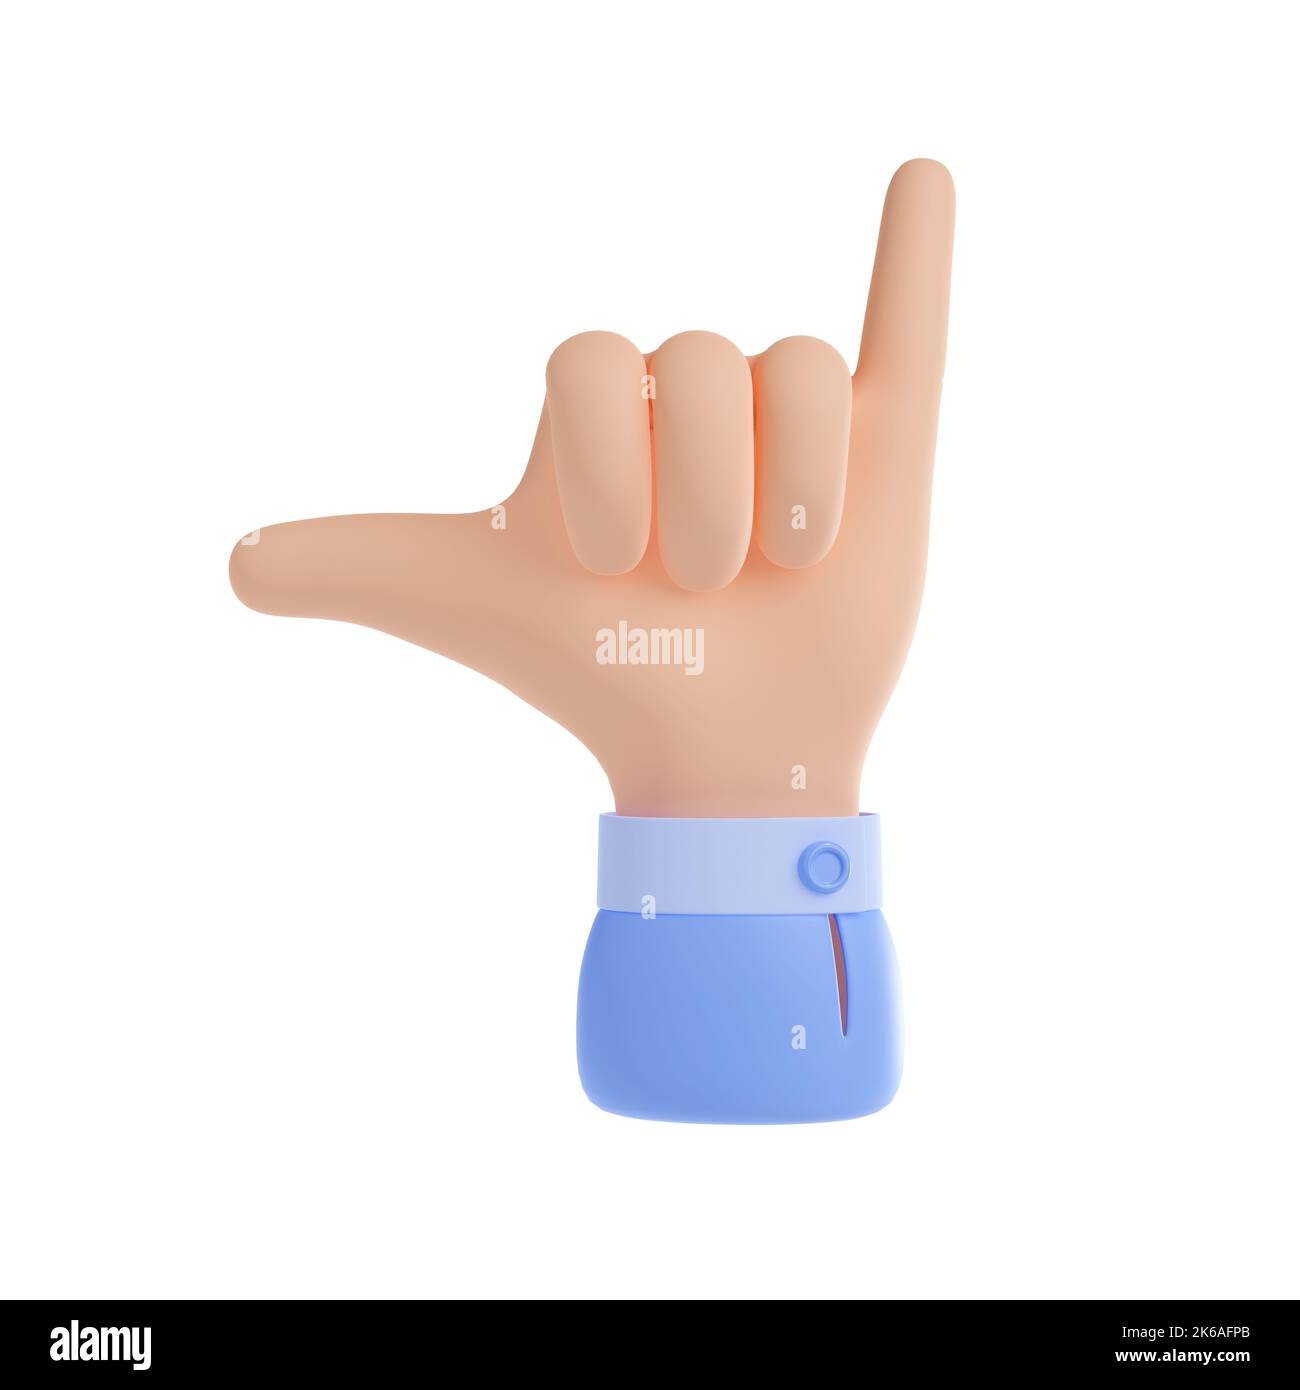 Surfers shaka hand gesture, hang loose sign. Icon of fist with two fingers, call me symbol or surf greeting gesture, 3d render illustration isolated on white background Stock Photo